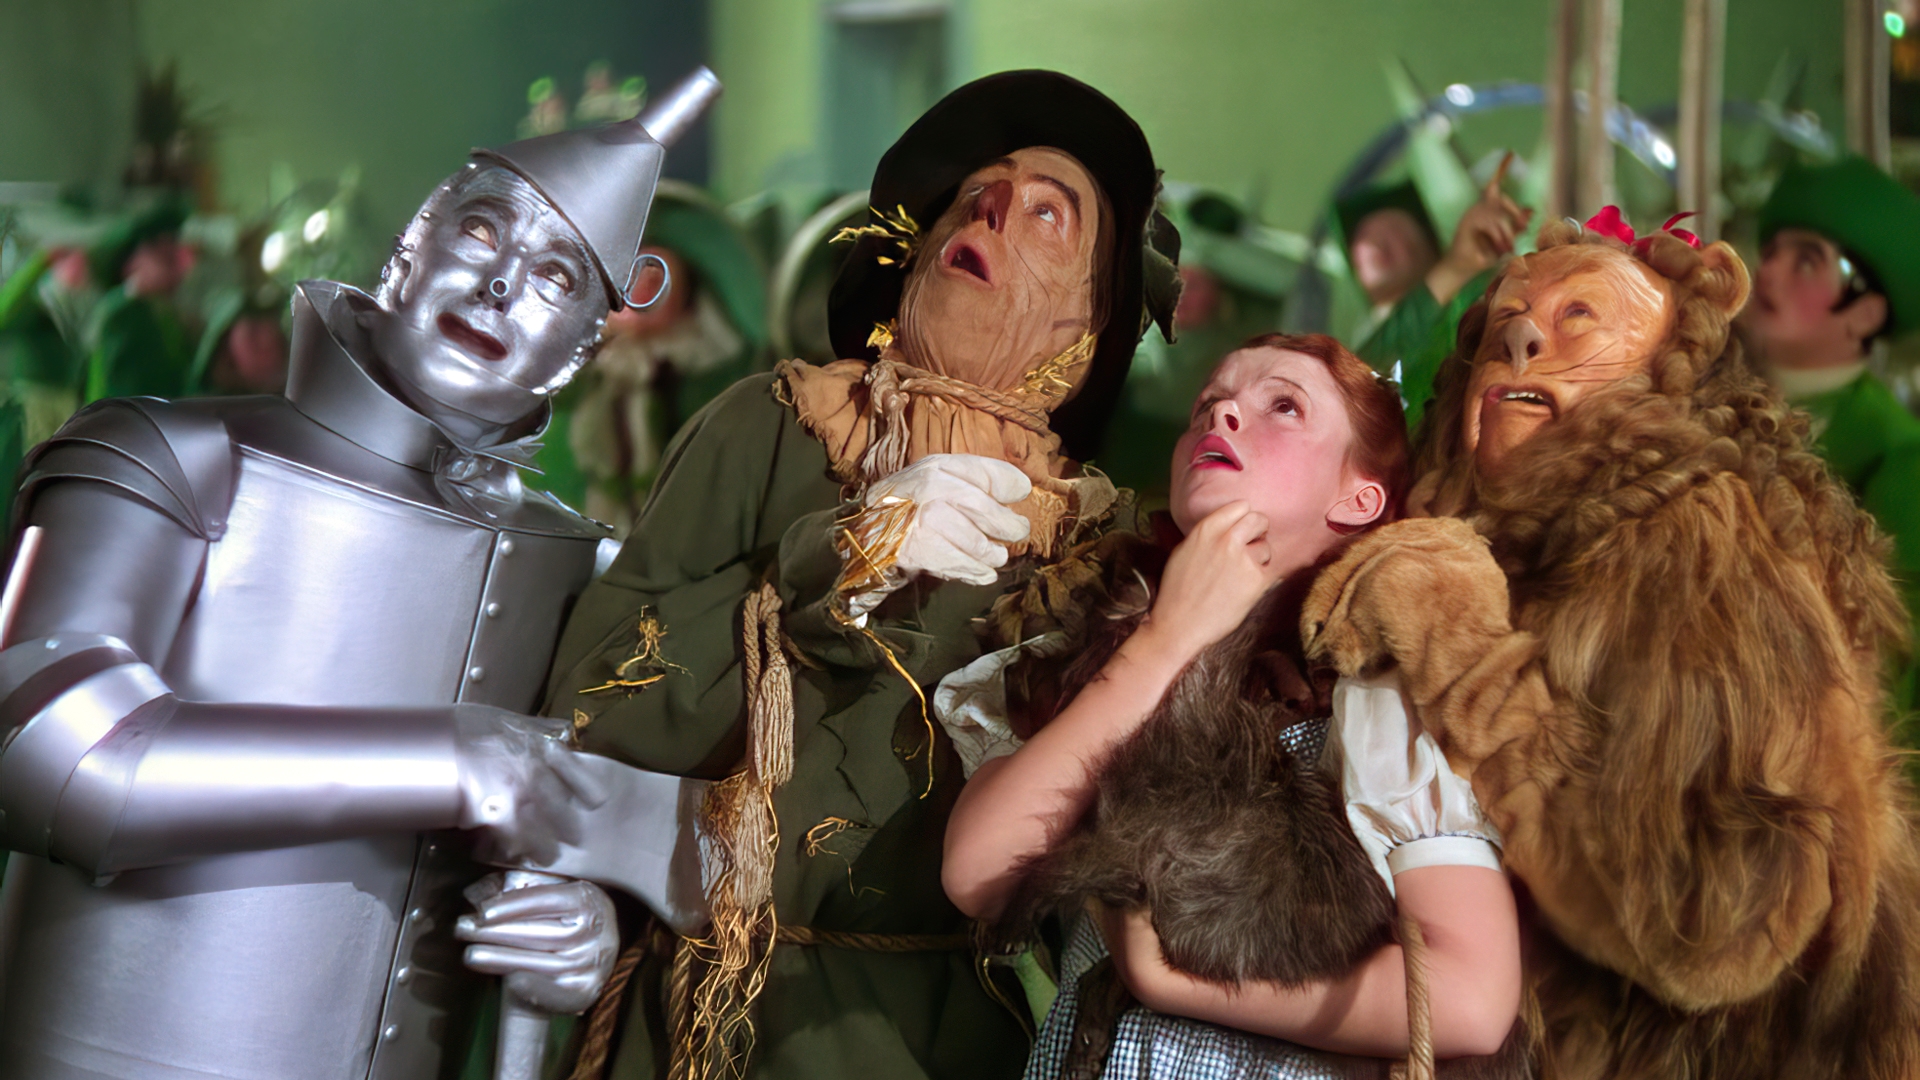 The Wizard Of Oz Movies Film Stills Dorothy Gale Tin Man Cowardly Lion Scarecrow Character Toto Dog 1920x1080